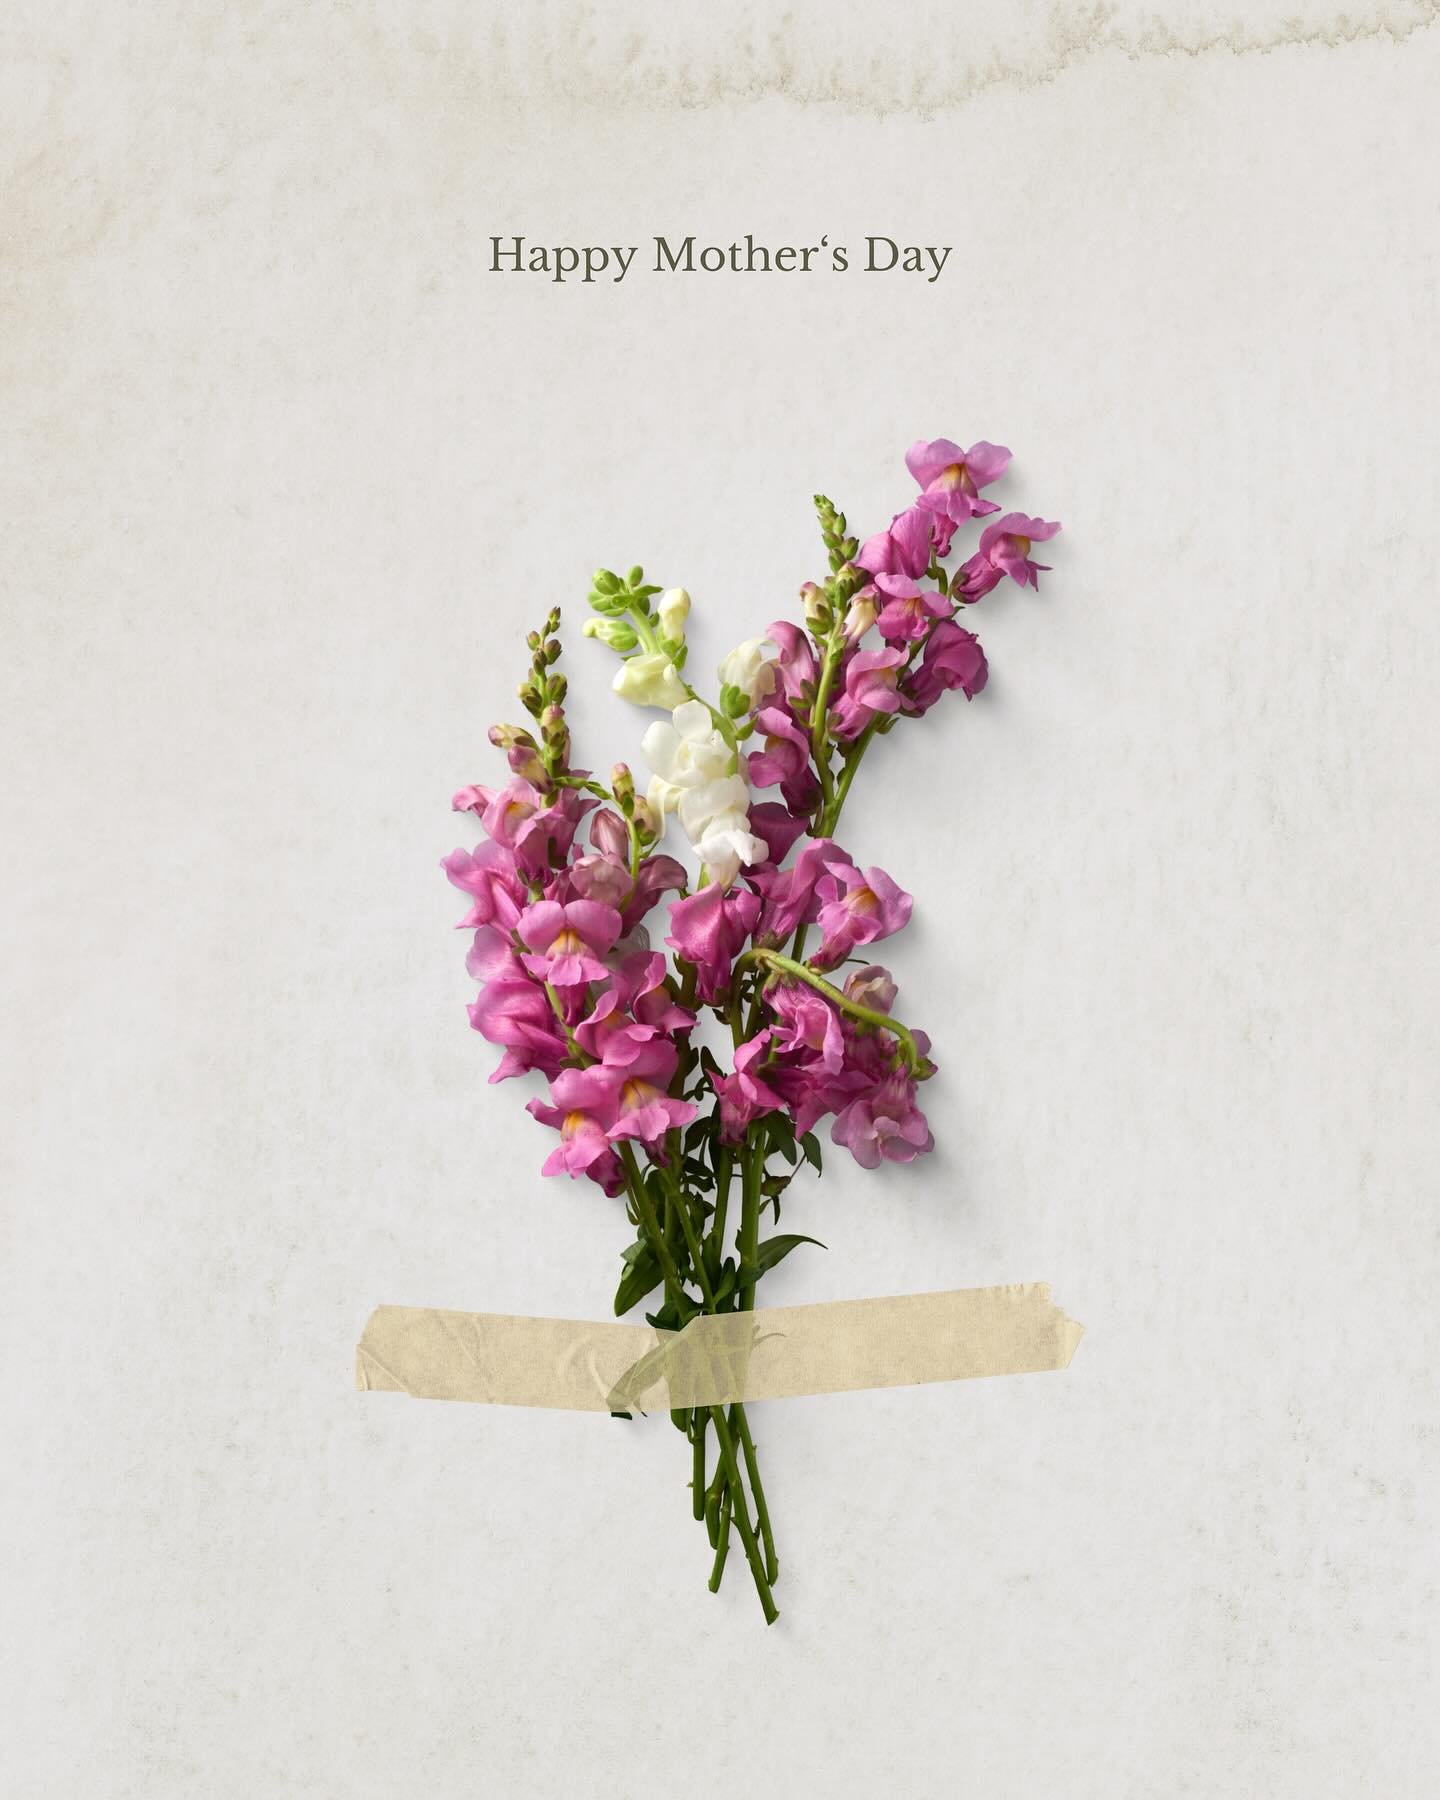 Happy Mother&rsquo;s Day. 

Love, Fromage Studio